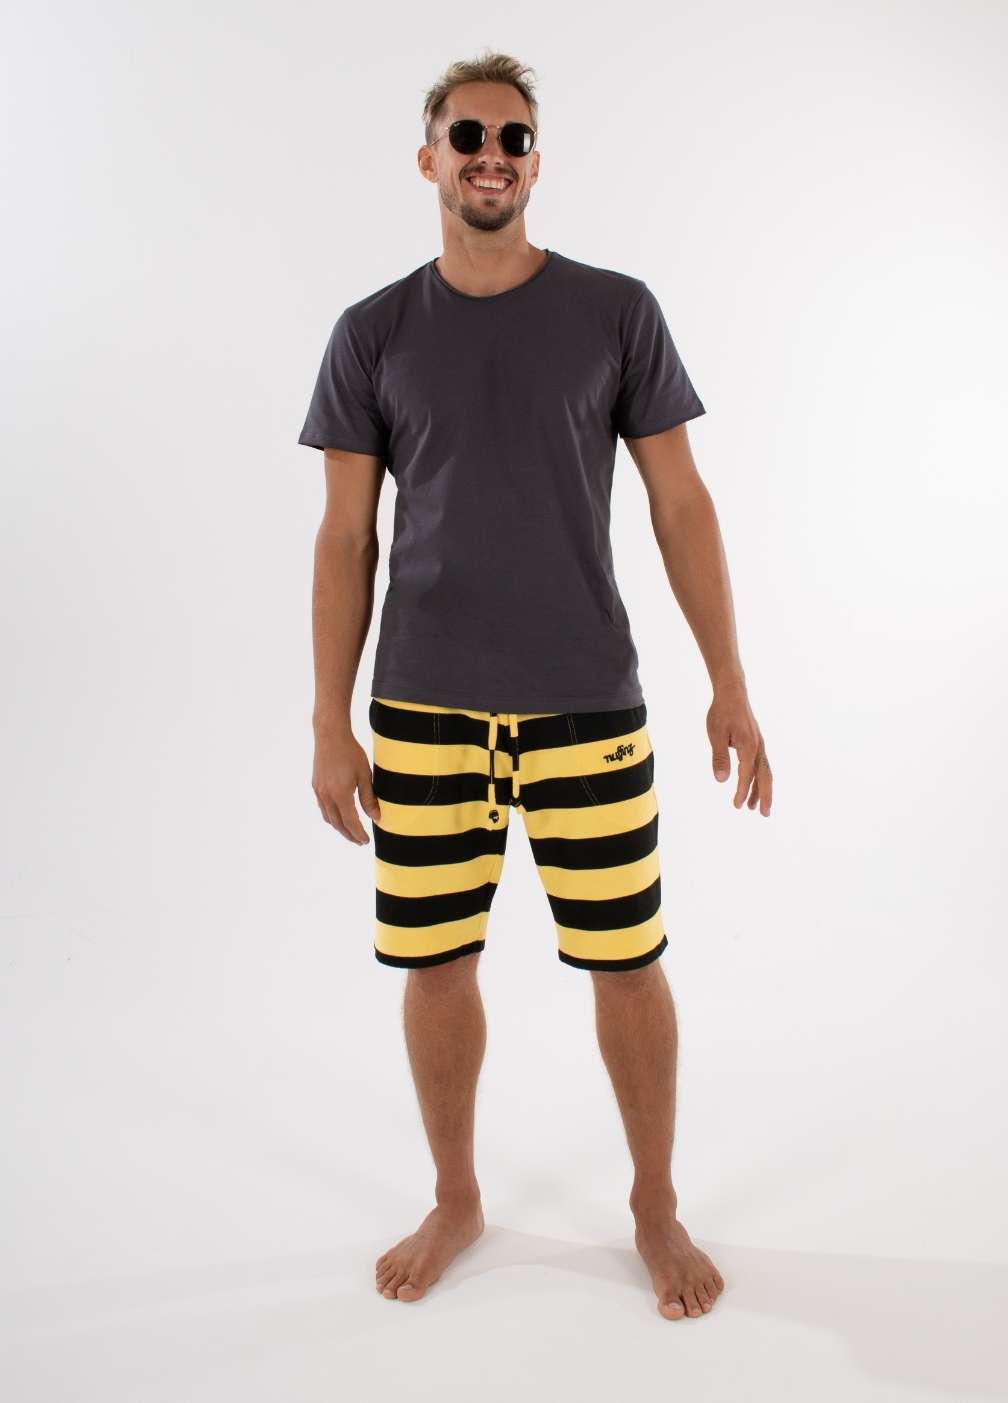 nuffinz YARROW TOWEL SHORTS ST - whole outfit visible from the front - made out of organic terry cloth - sustainable men's shorts - sunshine yellow striped